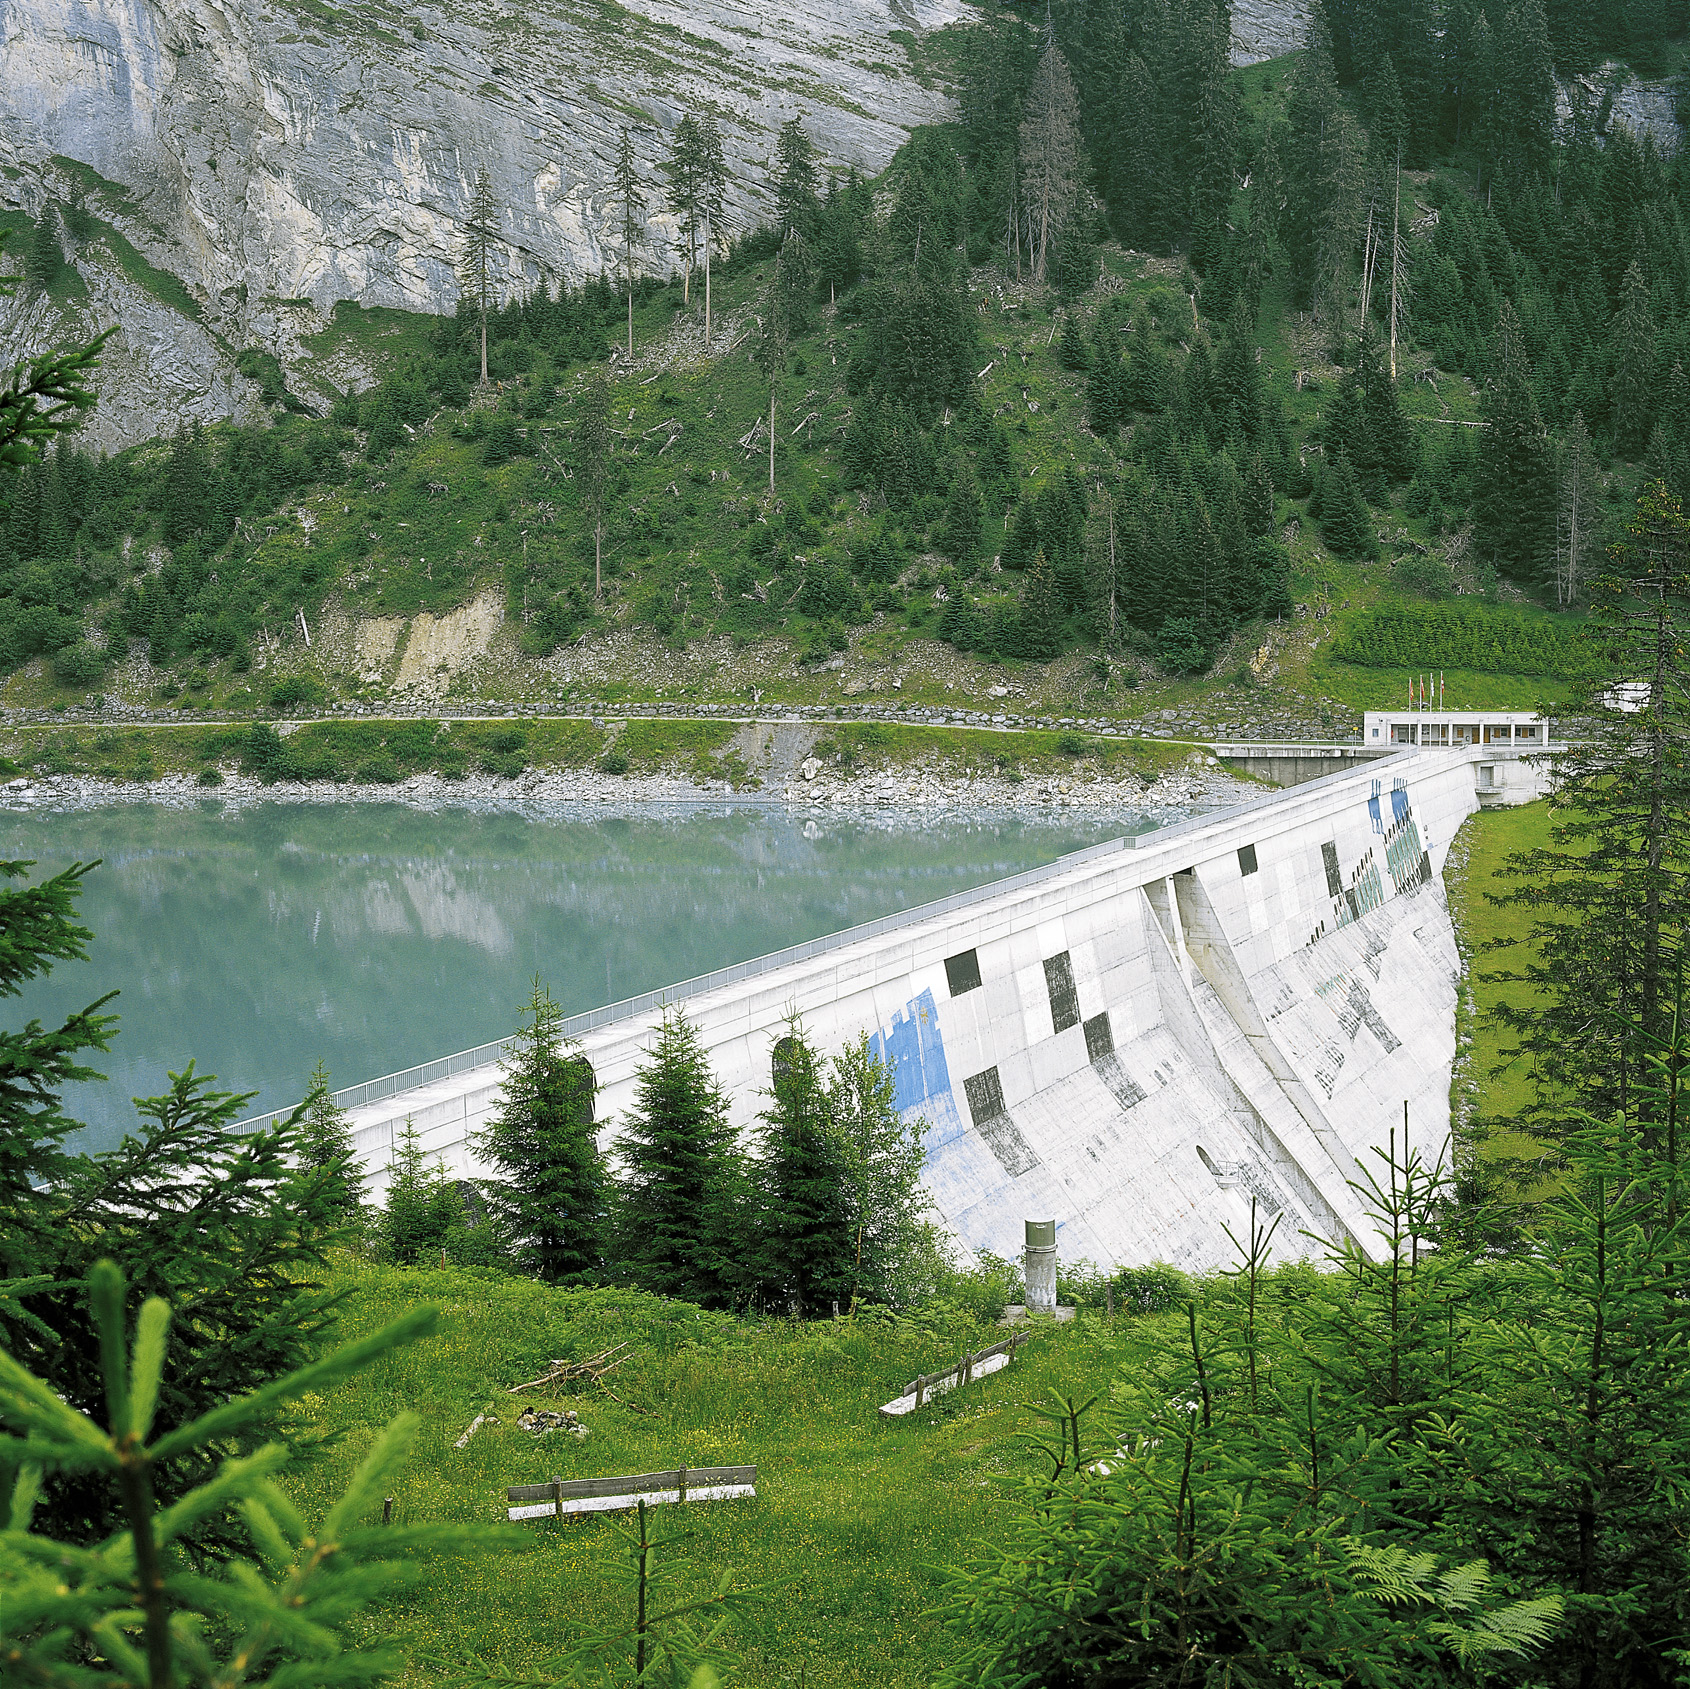 Panix gravity dam: The wall is a maximum of 53 metres high (height above the foundation), the crest is 270 metres long. The holding volume is 161,000 m3.